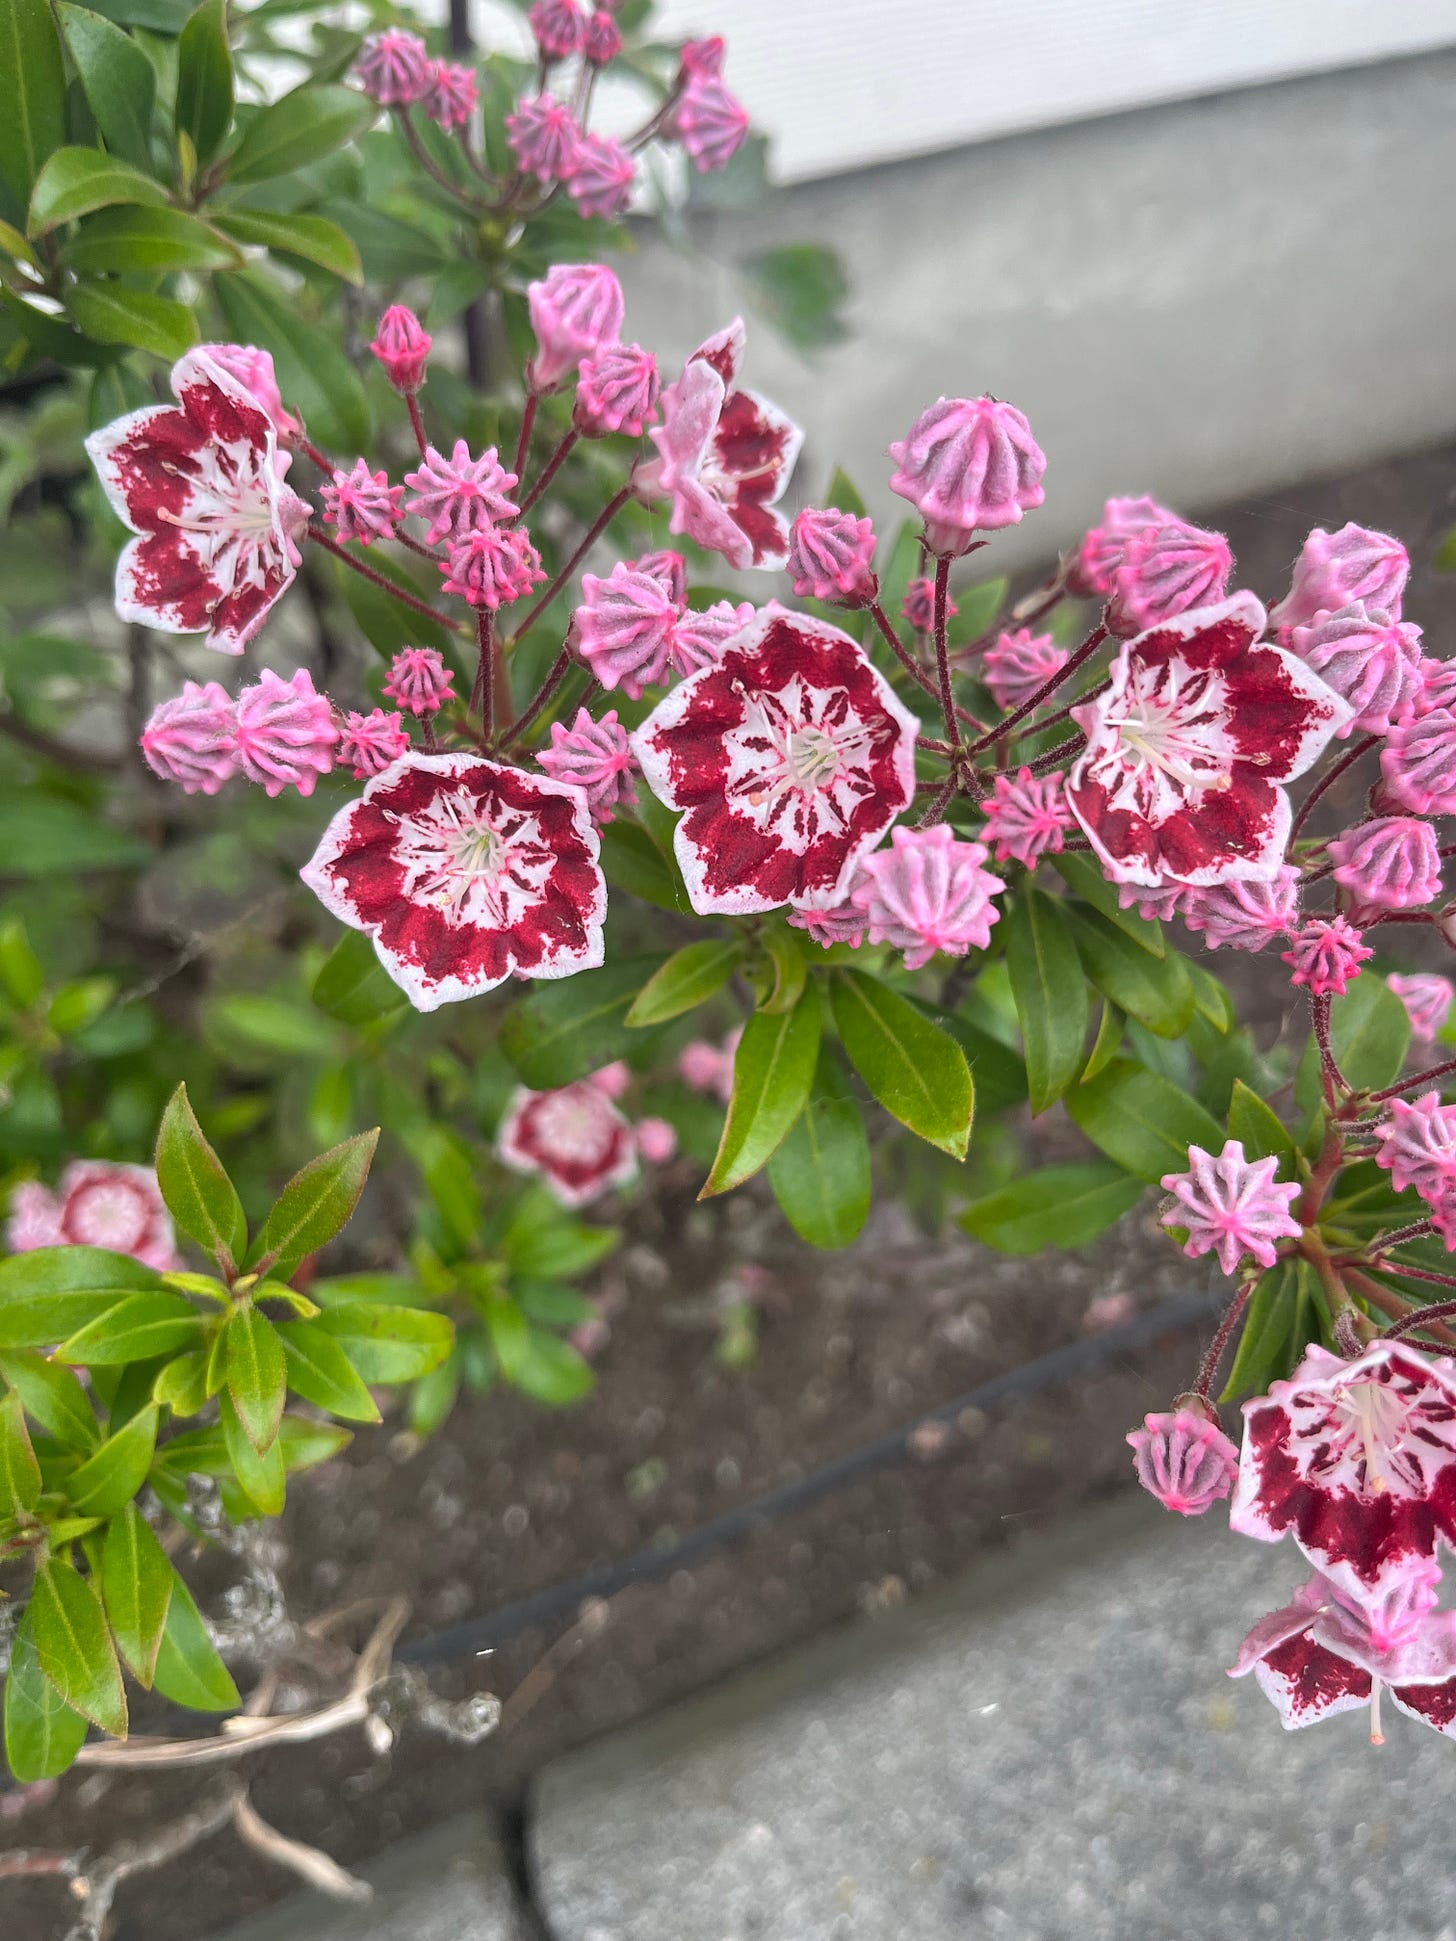 Small, bright pink buds are interspersed with open, pentagonal flowers that feature white margins, a ring of dark burgundy, and dark burgundy and pink spikes radiating from the center. It's a mountain laurel bush. 